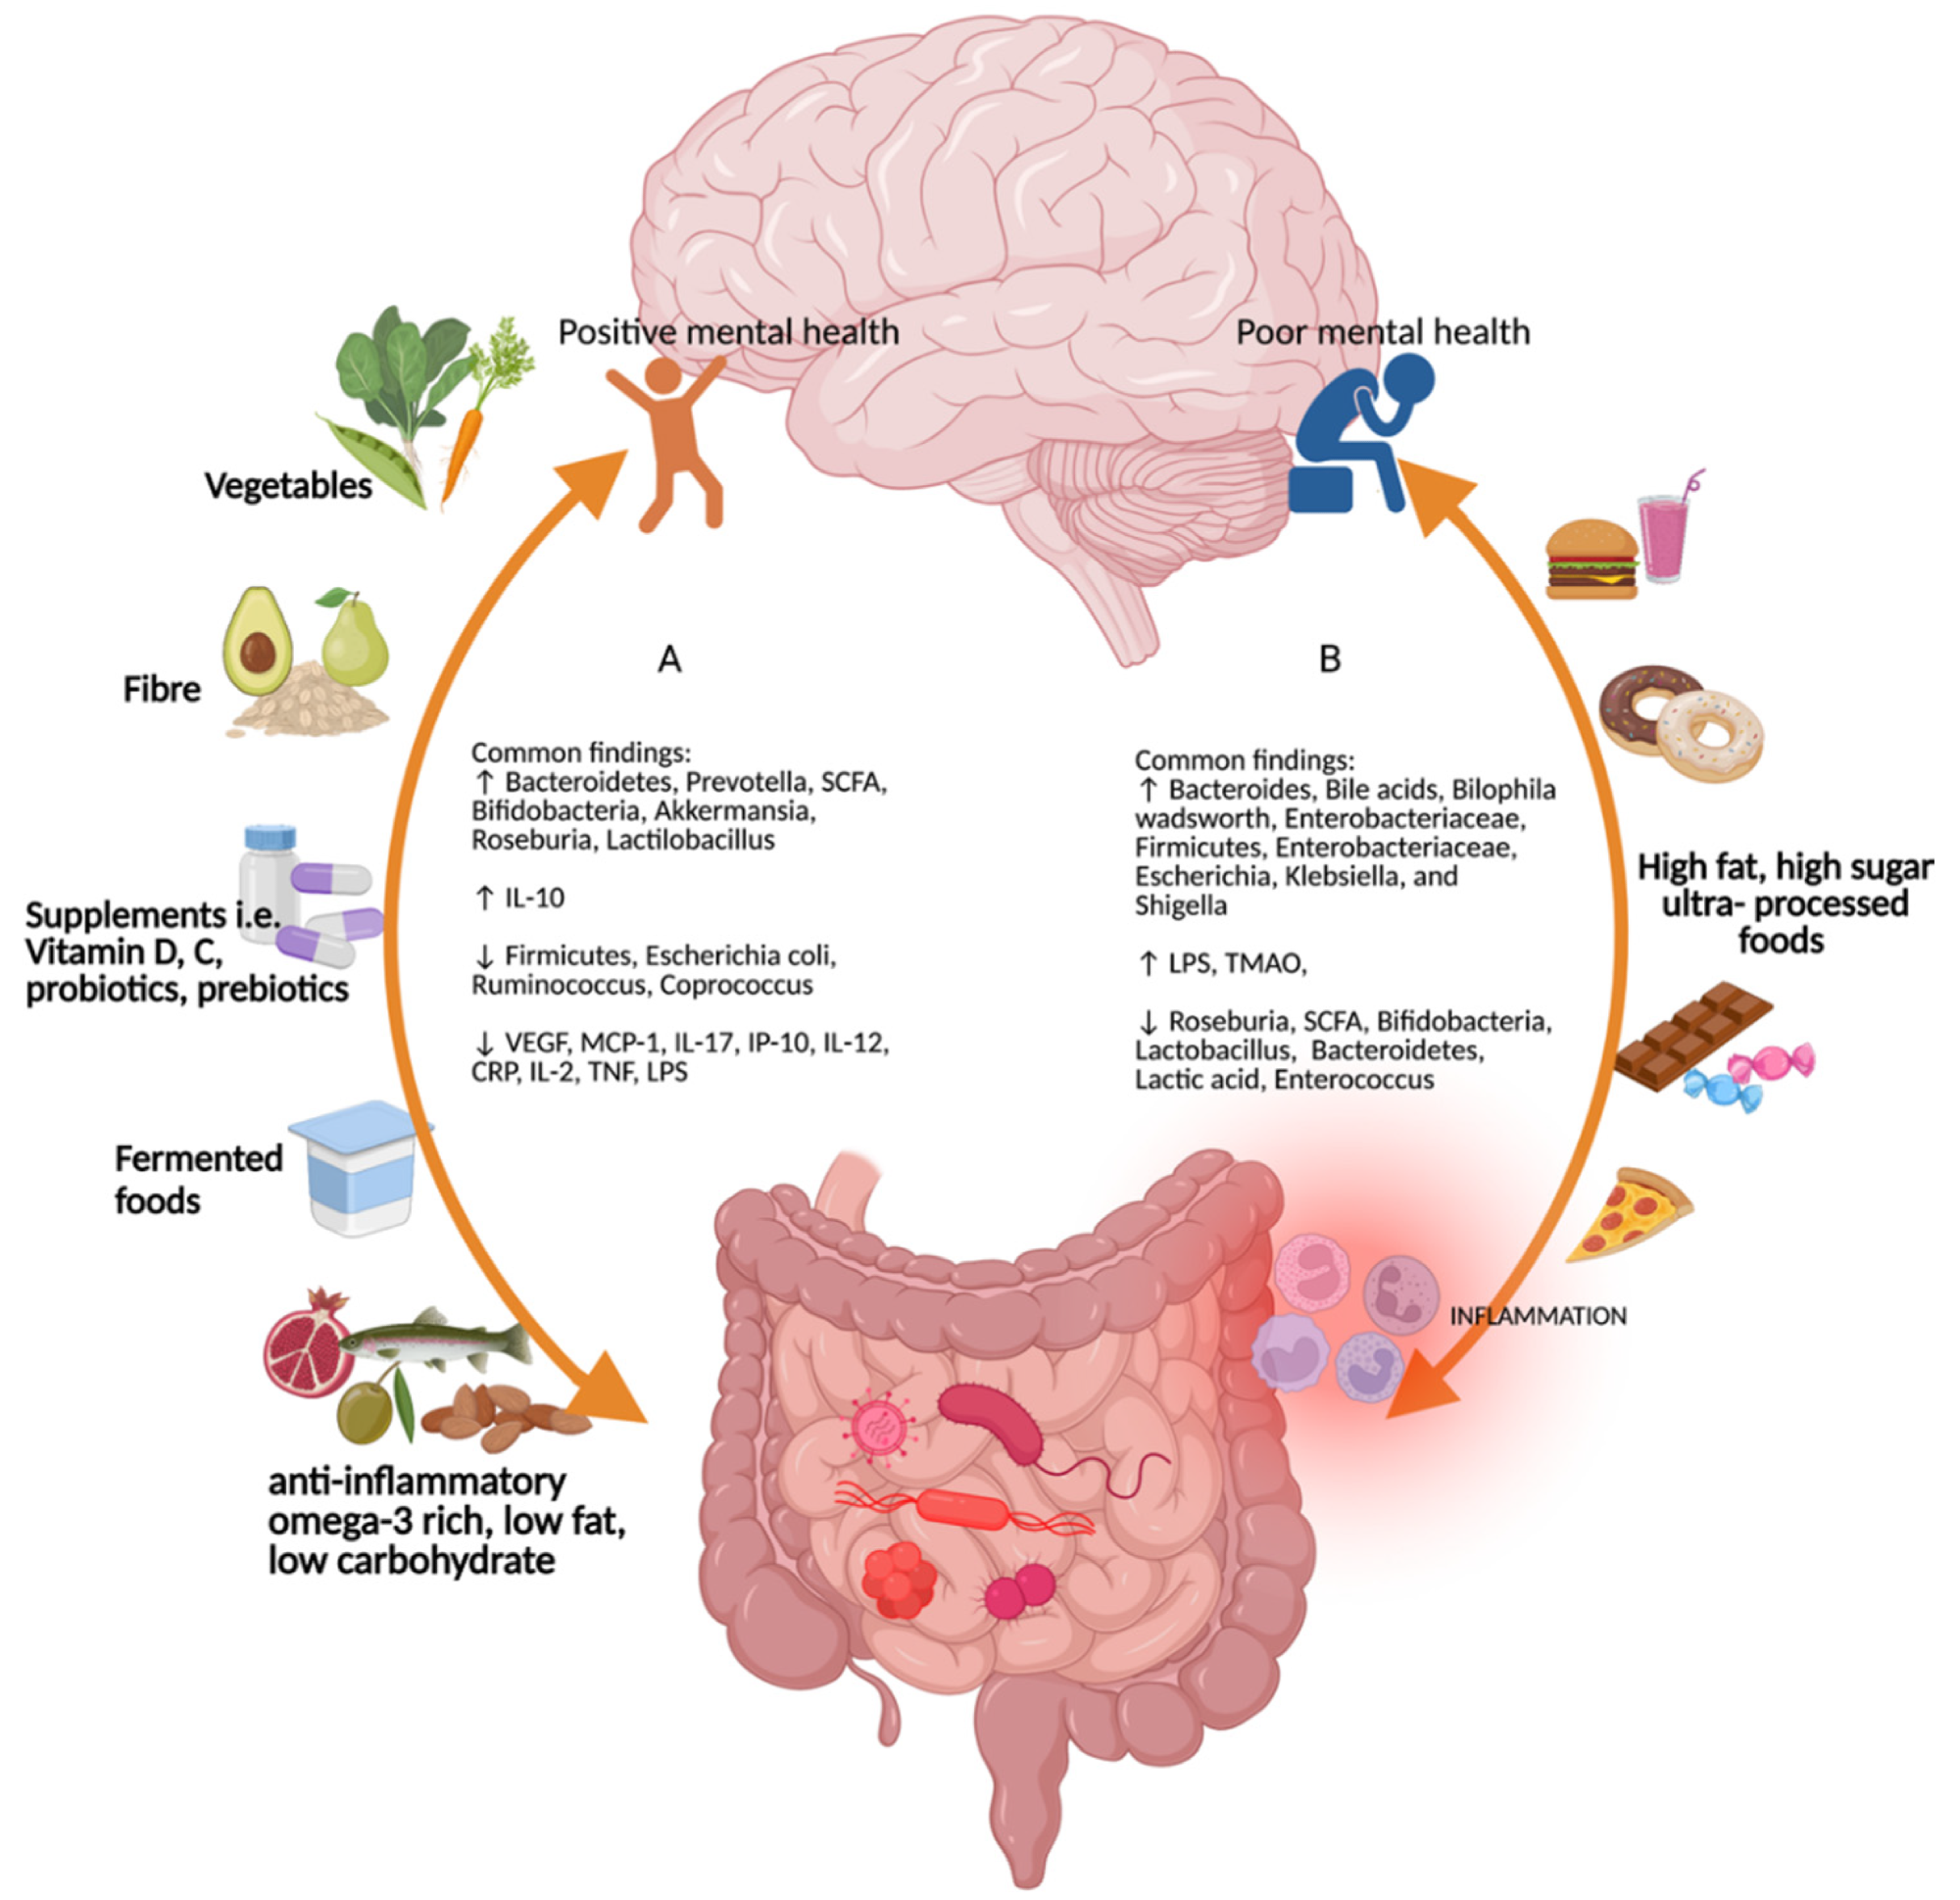 Findings common to different types of diet on the gut-brain-microbiome axis.  (A) Diets rich in vegetables, fiber, micronutrients such as vitamins D and C, probiotics and prebiotics, fermented foods, anti-inflammatory foods high in omega-3s, low fat, and low carbohydrates promote positive mental health and increases in Bacteroidetes, Prevotella, short-chain fatty acids, Bifodobacteria, Akkermansia, Roseburia, Lactilobacillus, and interleukin (IL) -10, and decreases in Firmicutes, Escherichia coli, Ruminococcus, Coprococcus, endothelial growth factor interferon-1 chemoat protein, gamma-induced monocyte protein 10, IL-17, IL-12, c-reactive protein, IL-2, tumor necrosis factor, and lipopolysaccharide.  (B) High-fat, high-sugar, ultra-processed foods add Bacteroides, Bile acids, Bilophila wadsworth, Enterobacteriaceae, Firmicutes, Enterobacteriaceae, Escherichia, Klebsiella, and Shigella.  Figure created by Biorender (accessed 29 April 2022).